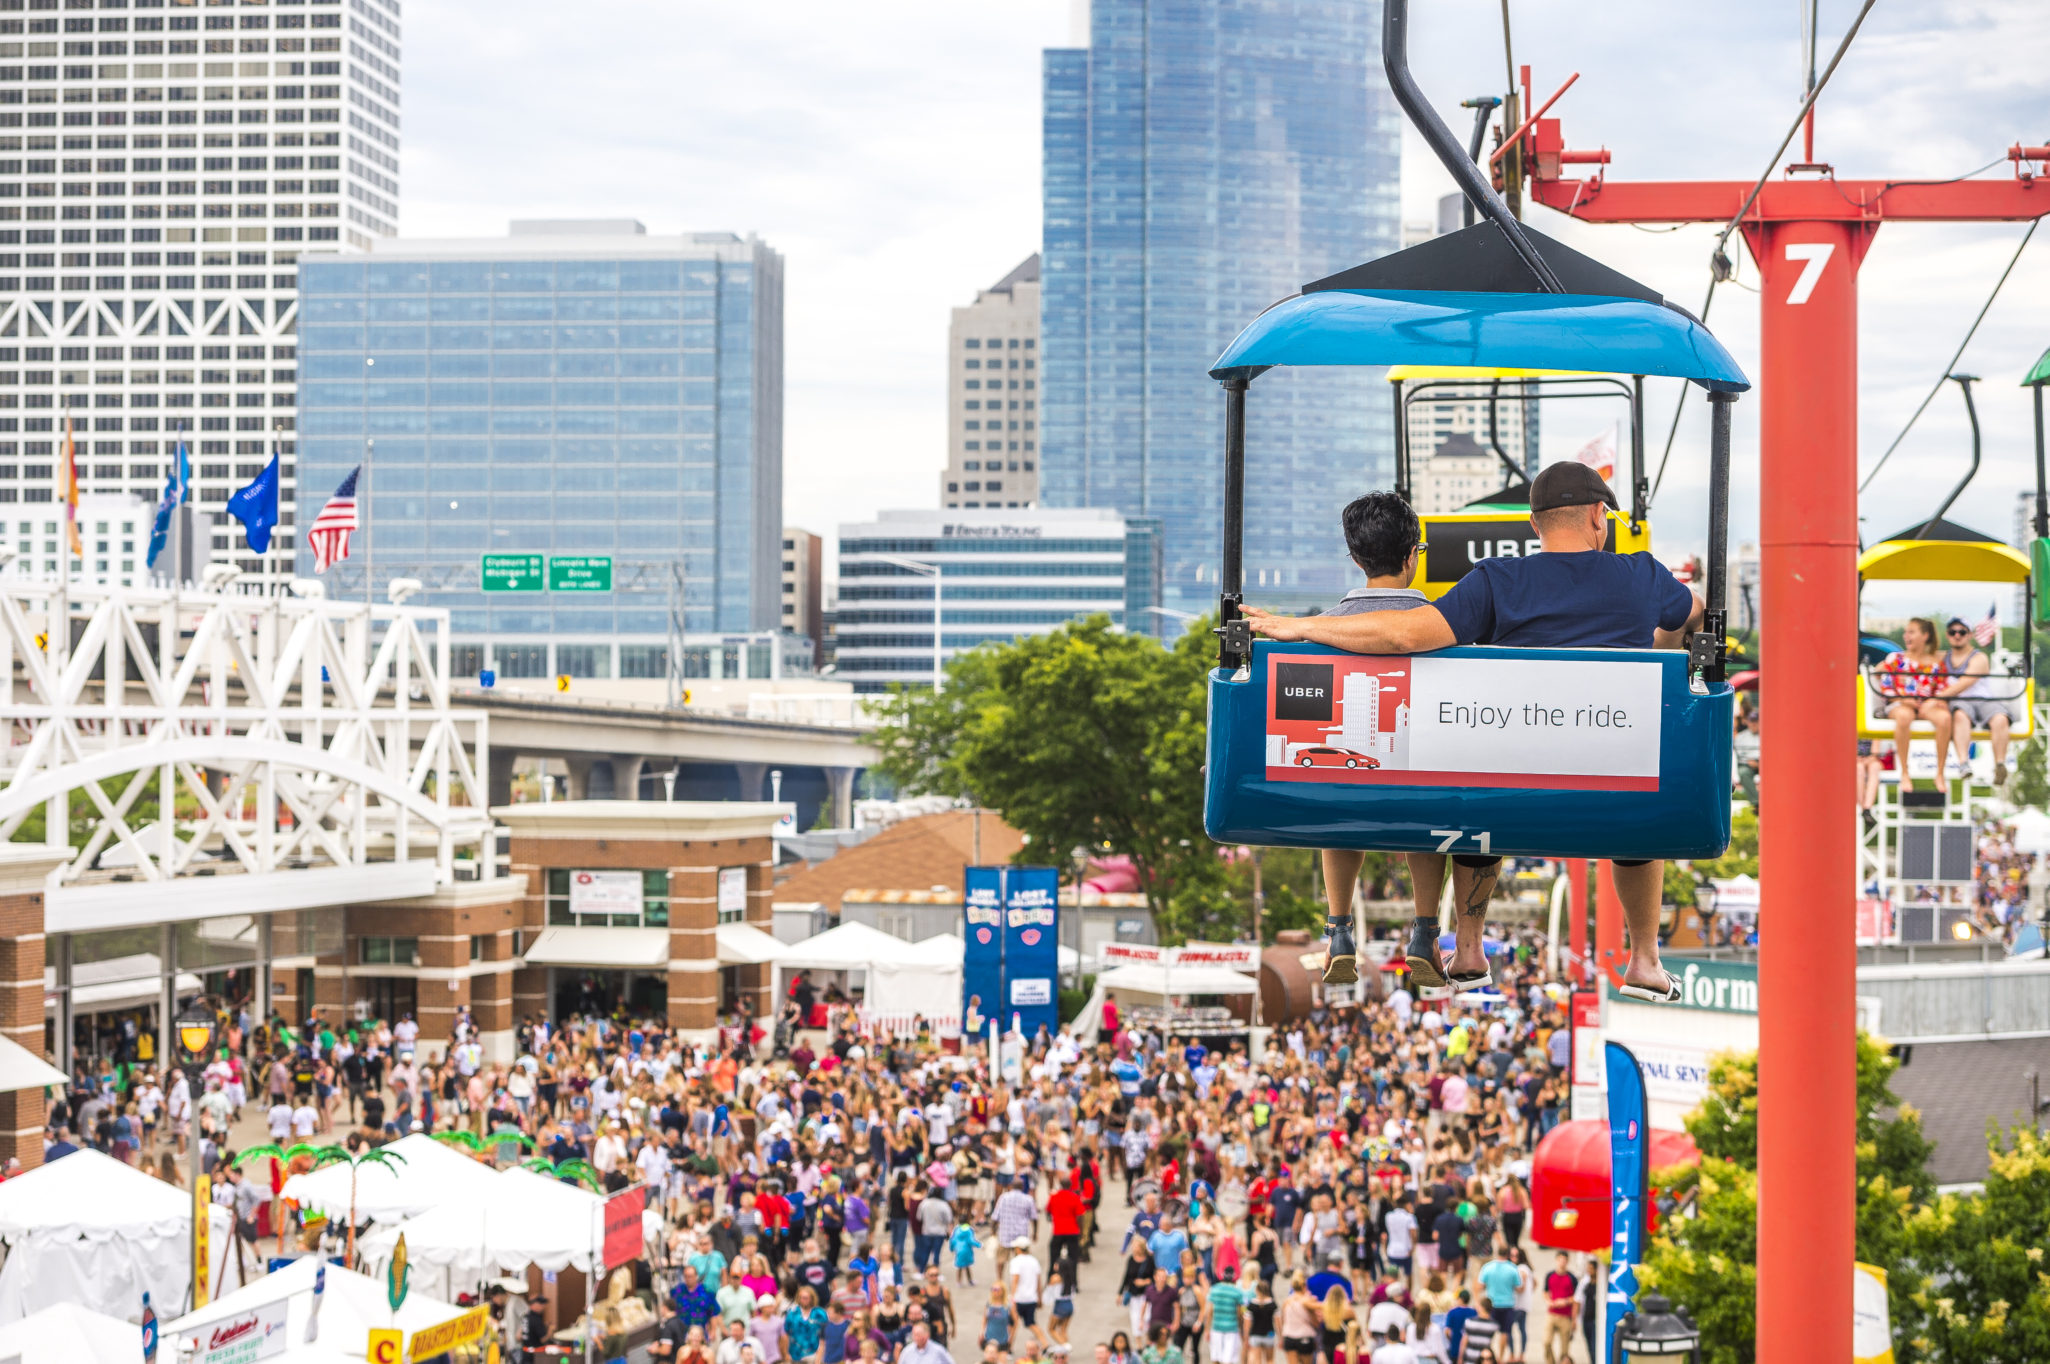 Summerfest Welcomes Nearly a Million to the Best of Milwaukee